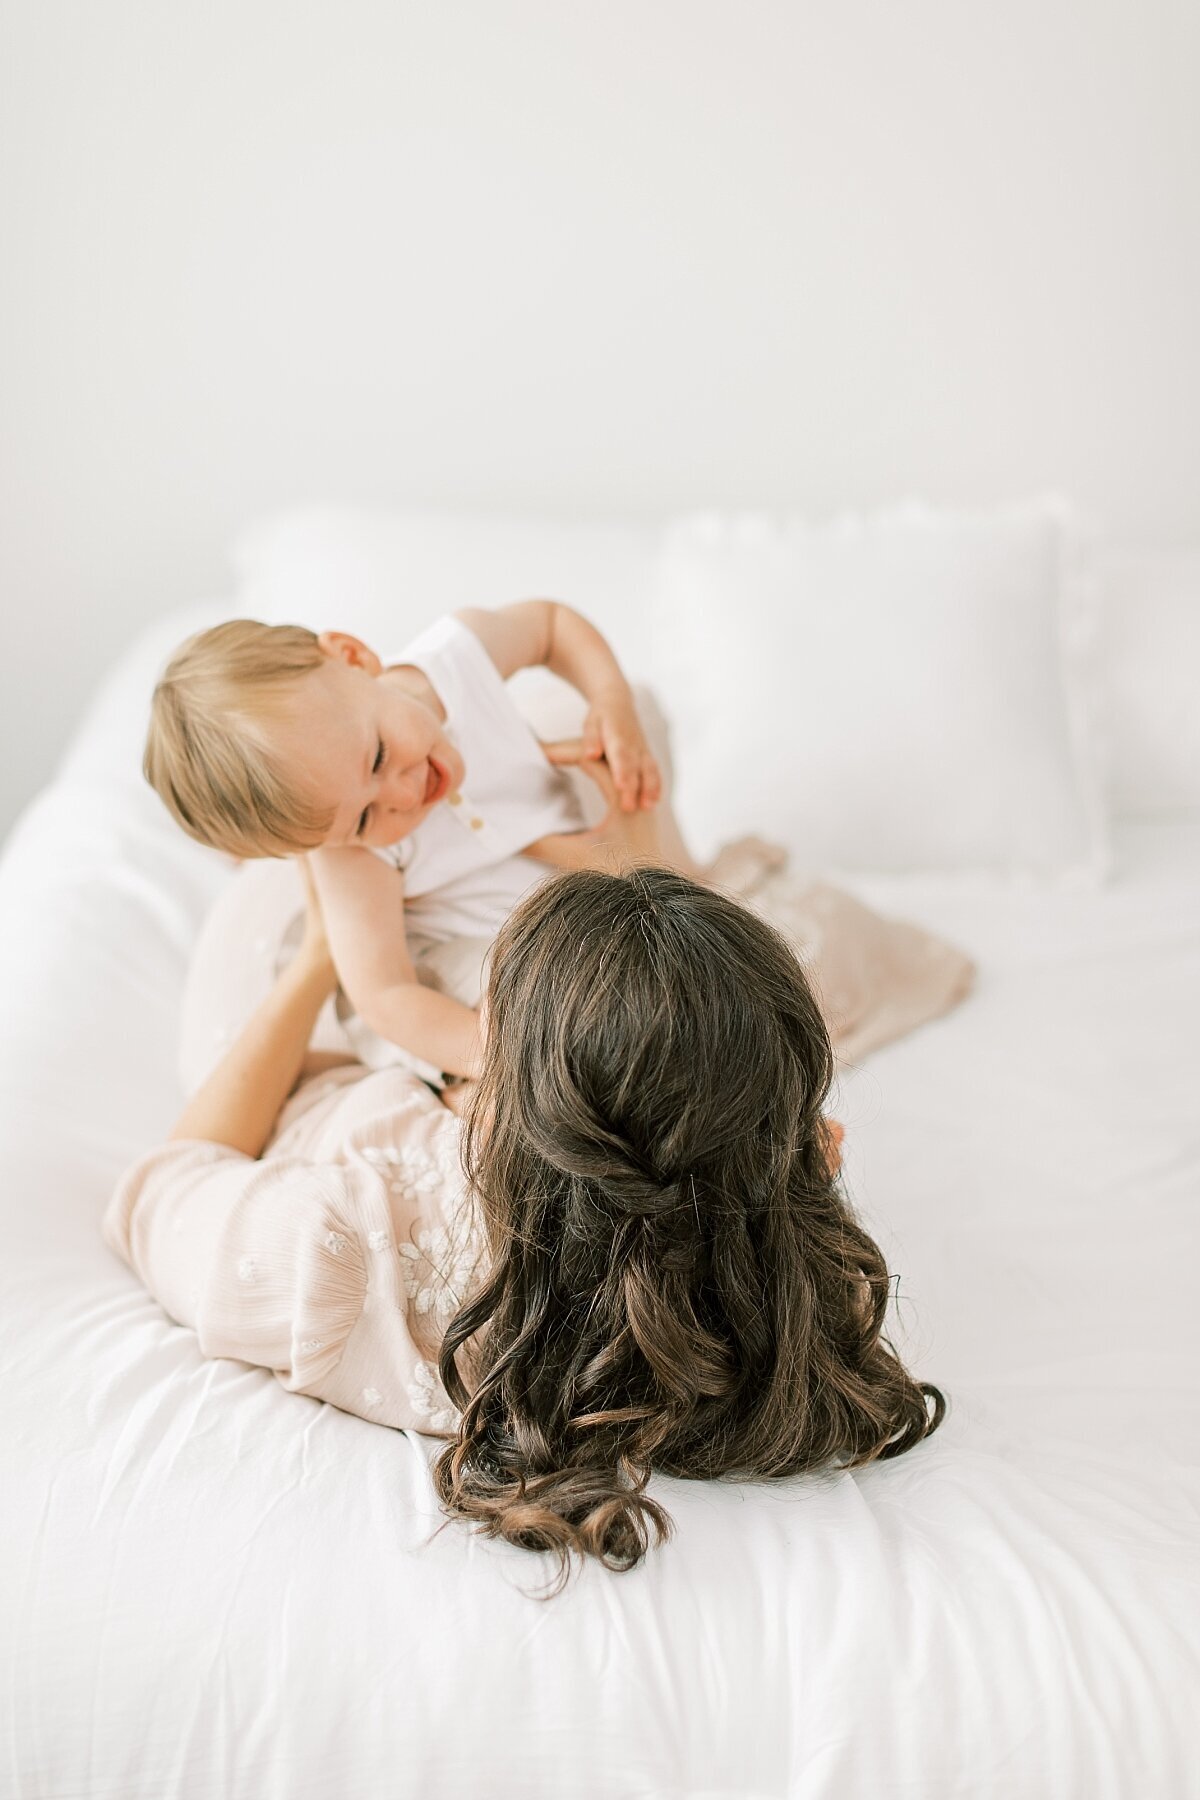 Rebecca Shivers Photography Lancaster lifestyle studio, Lancaster wedding photographer, Lancaster maternity photography, Lancaster newborn Photography, Lancaster family photographs, fine art photography